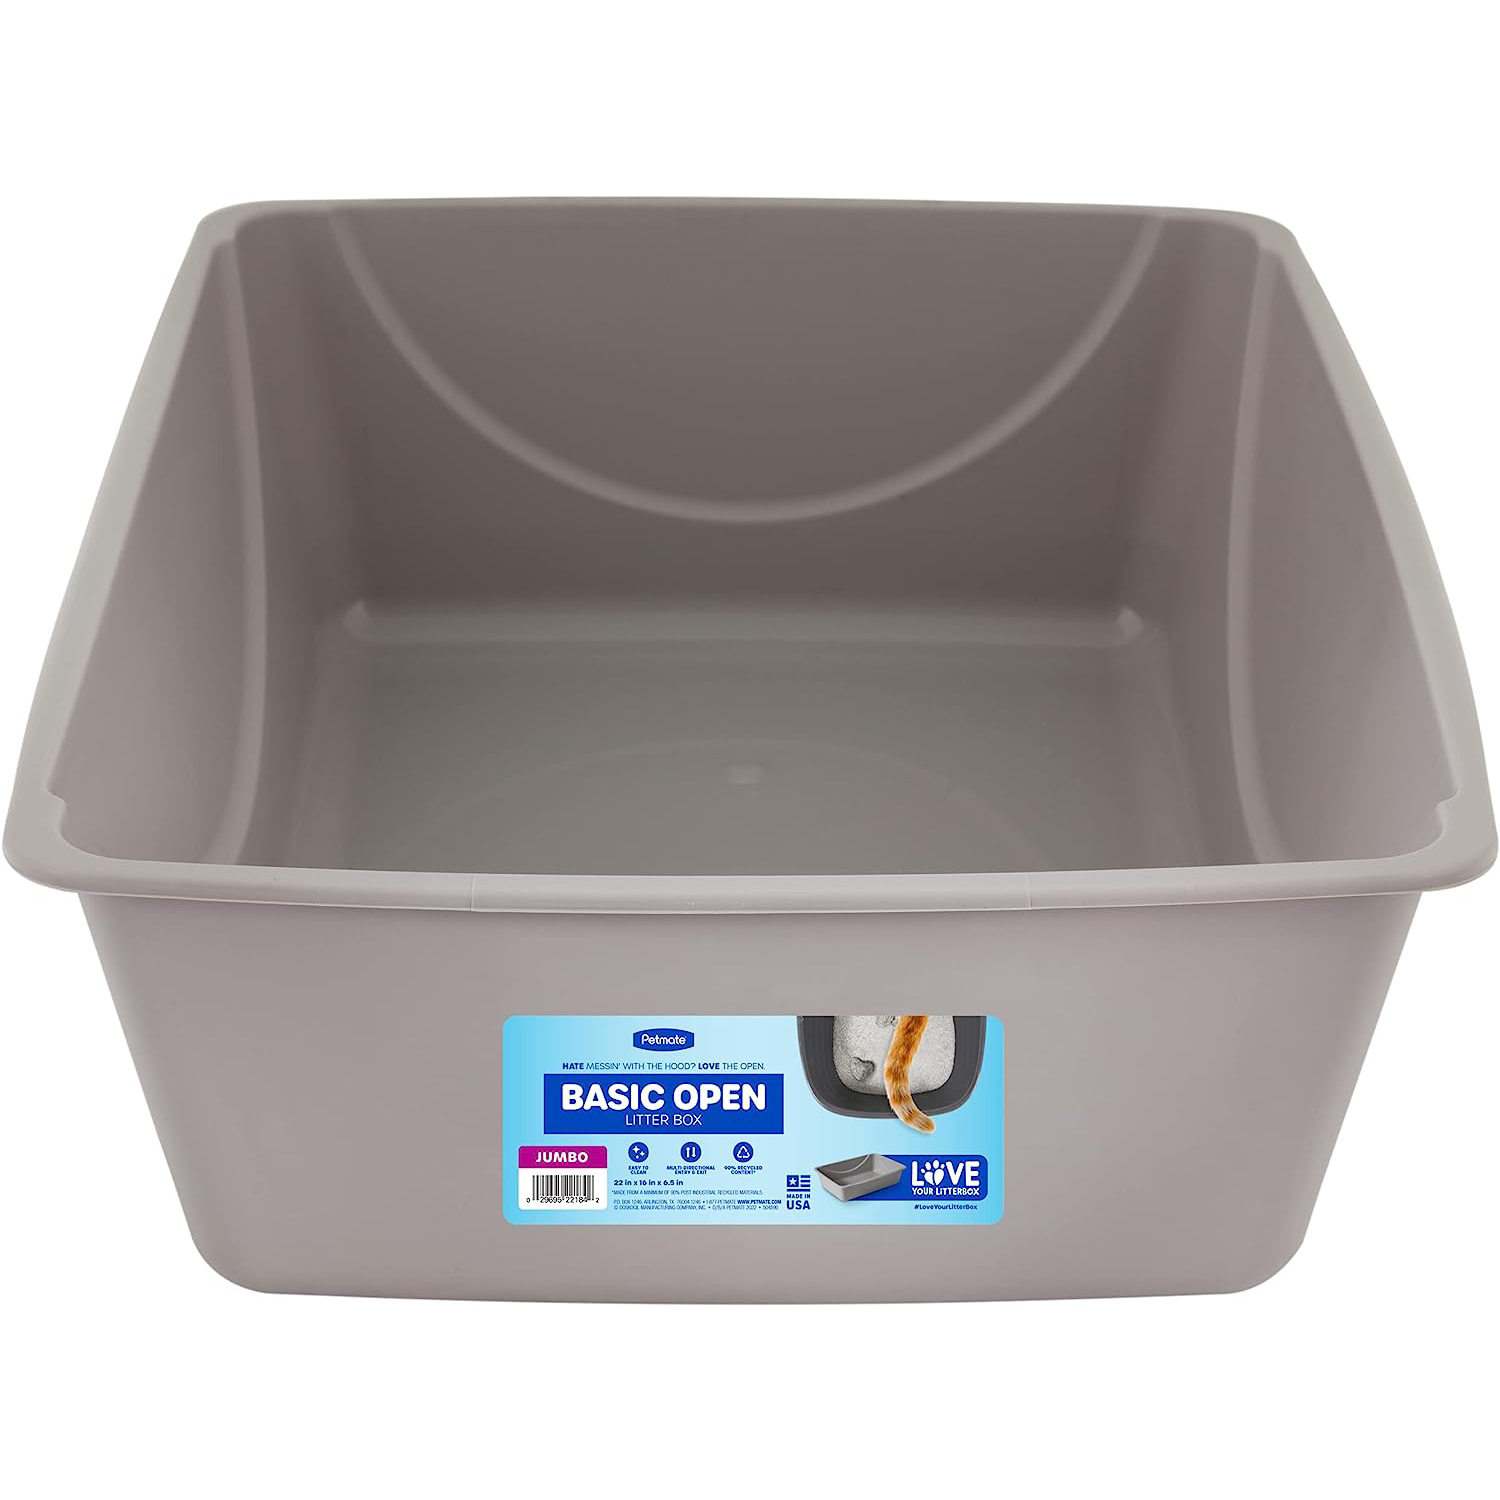 Petmate Open Cat Litter Box, Extra Large Nonstick Litter Pan Durable Standard Litter Box, Mouse Grey Great for Small & Large Cats Easy to Clean, Made in USA New